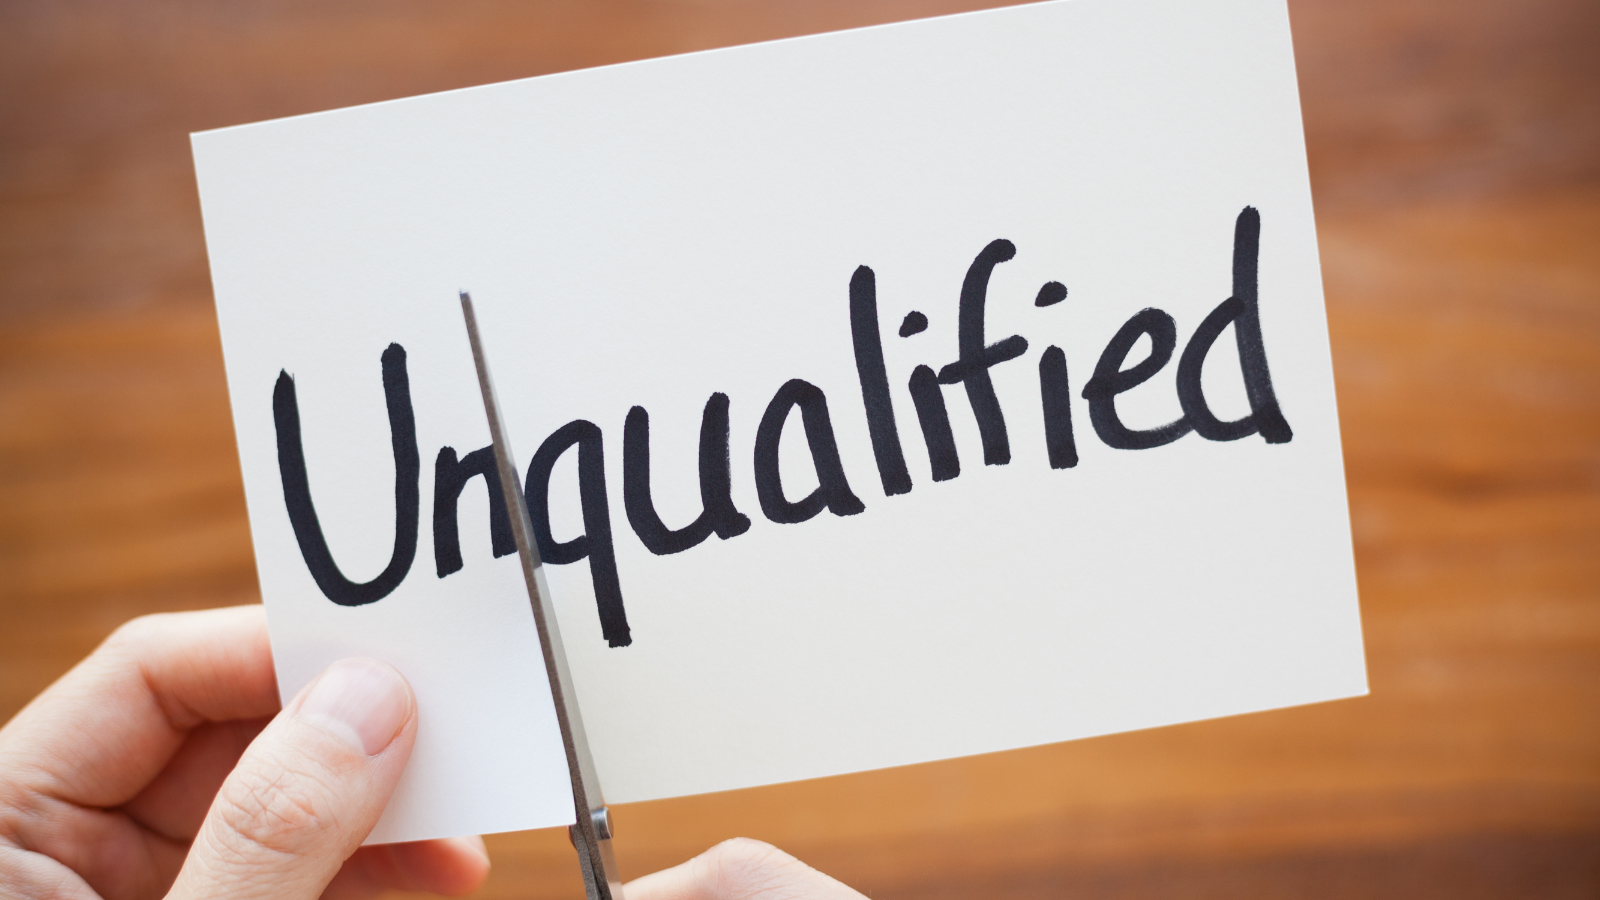 Was the Prospect Unqualified? Or Was the Salesperson Unqualified?